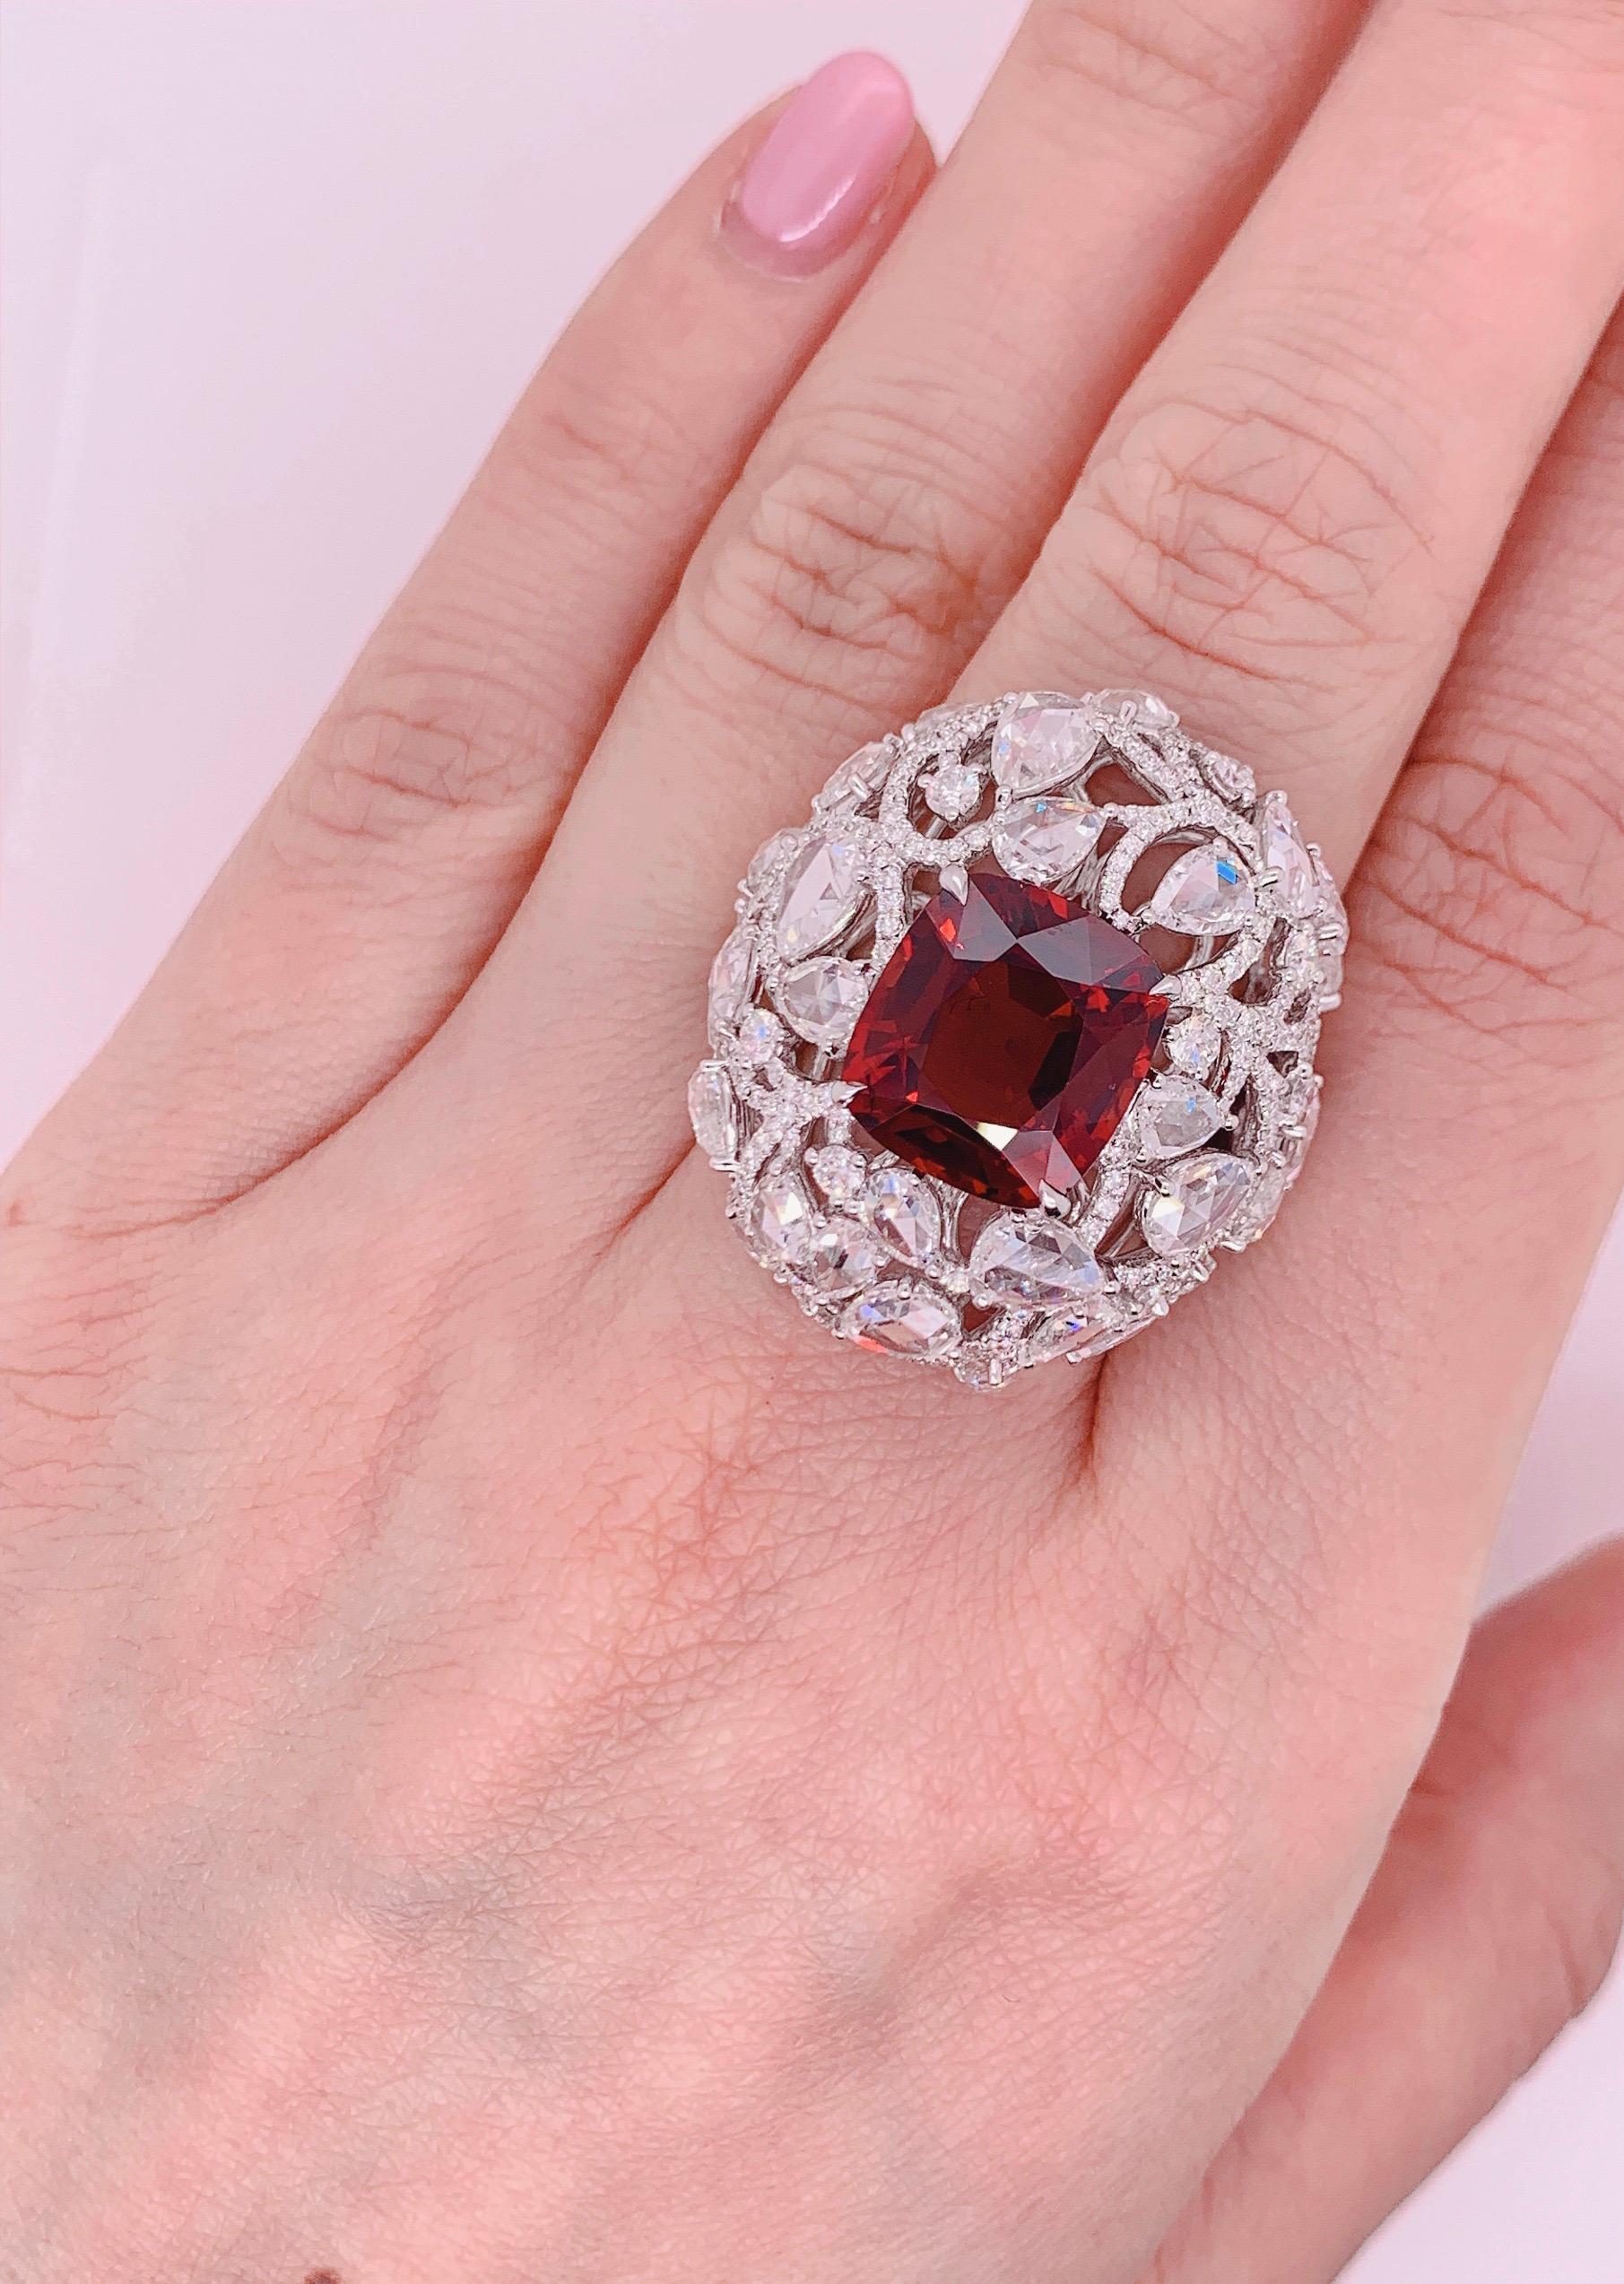 KAHN GRS Certified 7.5 Carat Unheated Spinel Ring For Sale 3